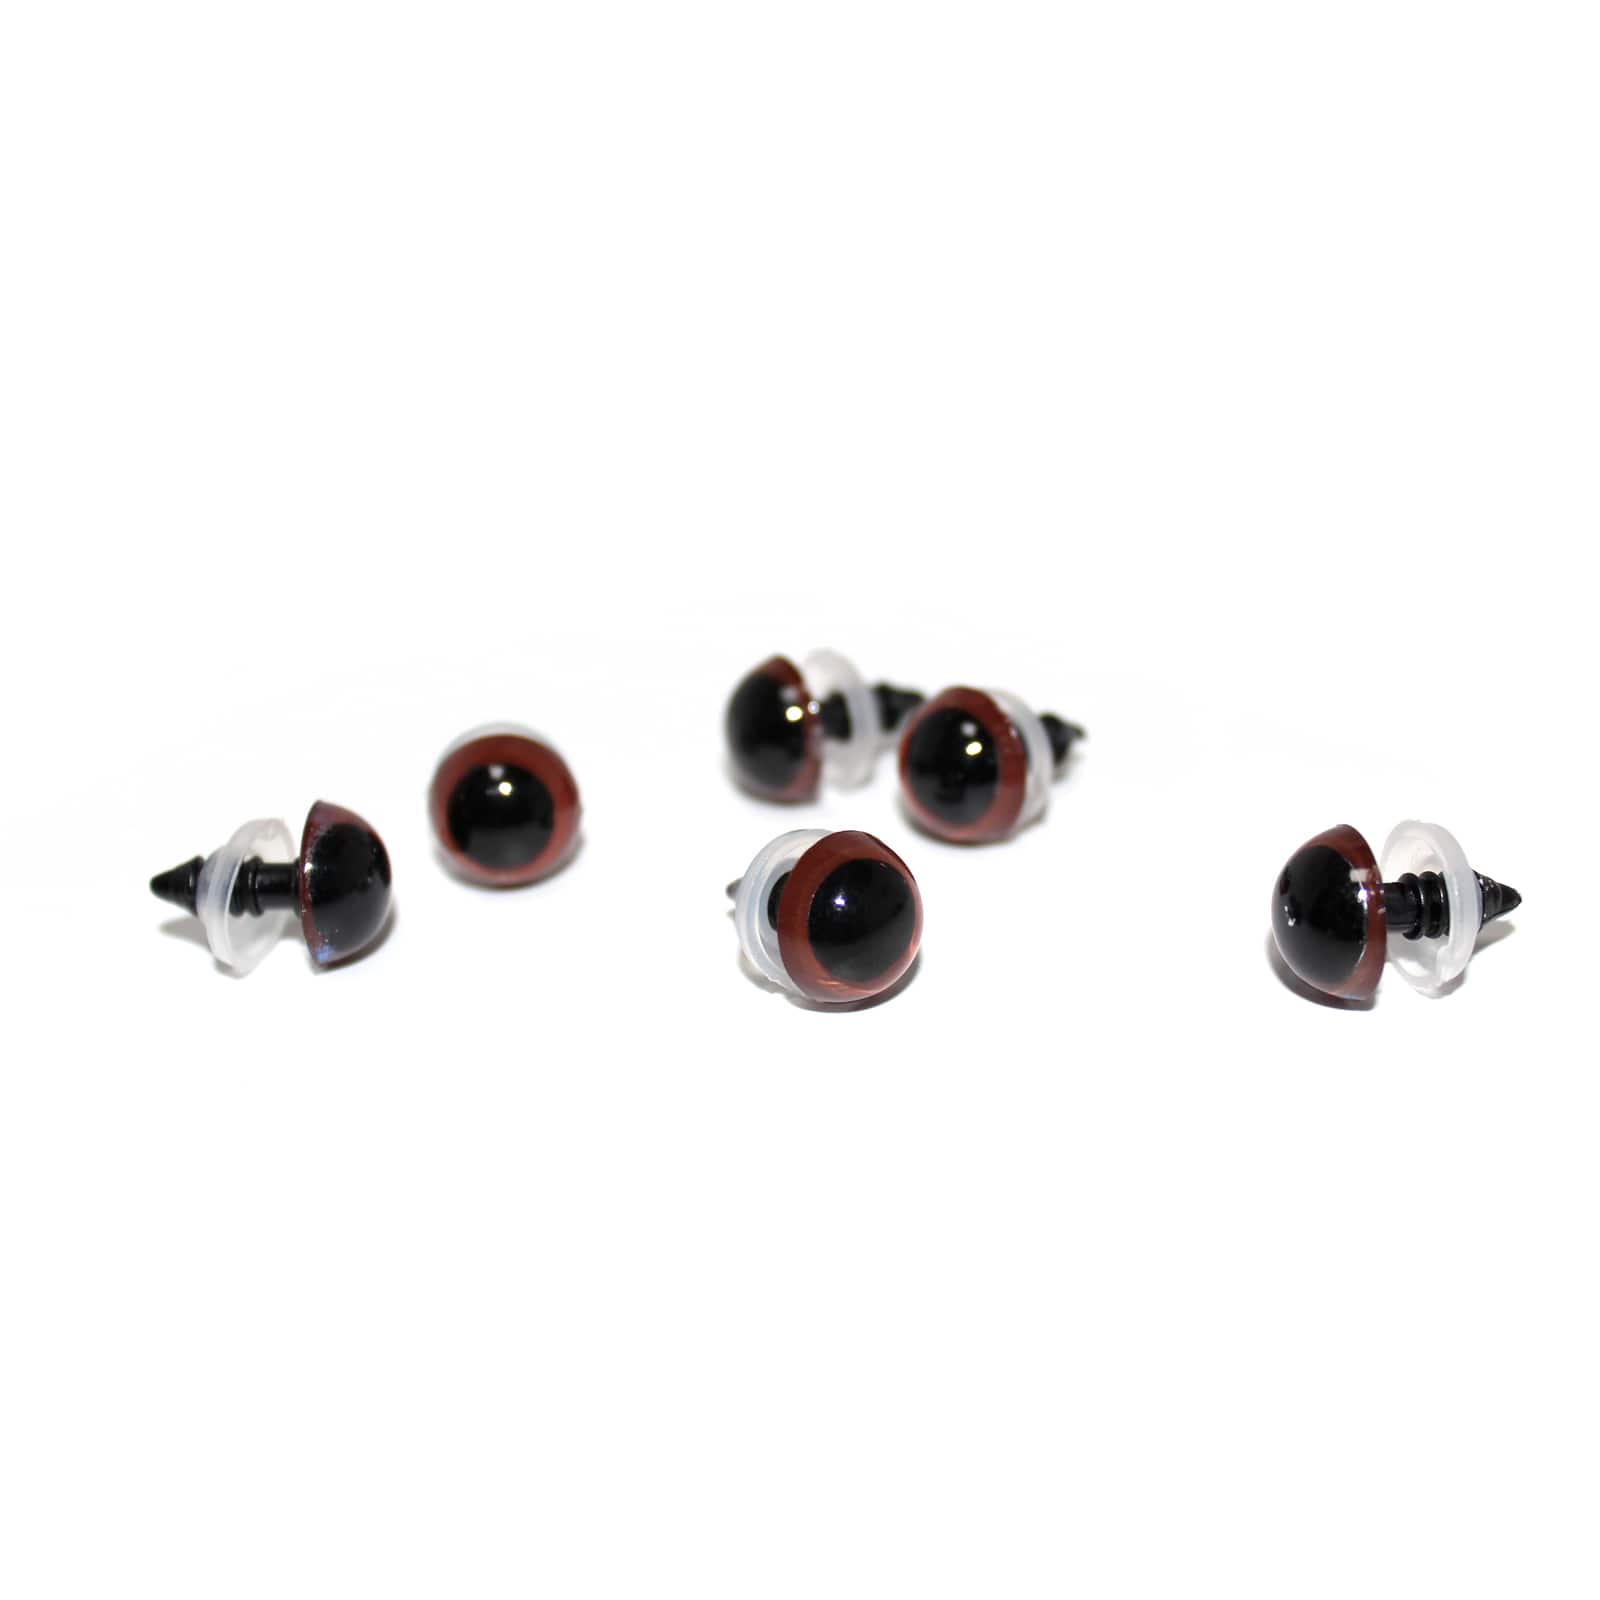 2 X 2 10 MM PAIR TOY MAKING 4 EYES IN TOTAL. BLACK PLASTIC SAFETY EYES 